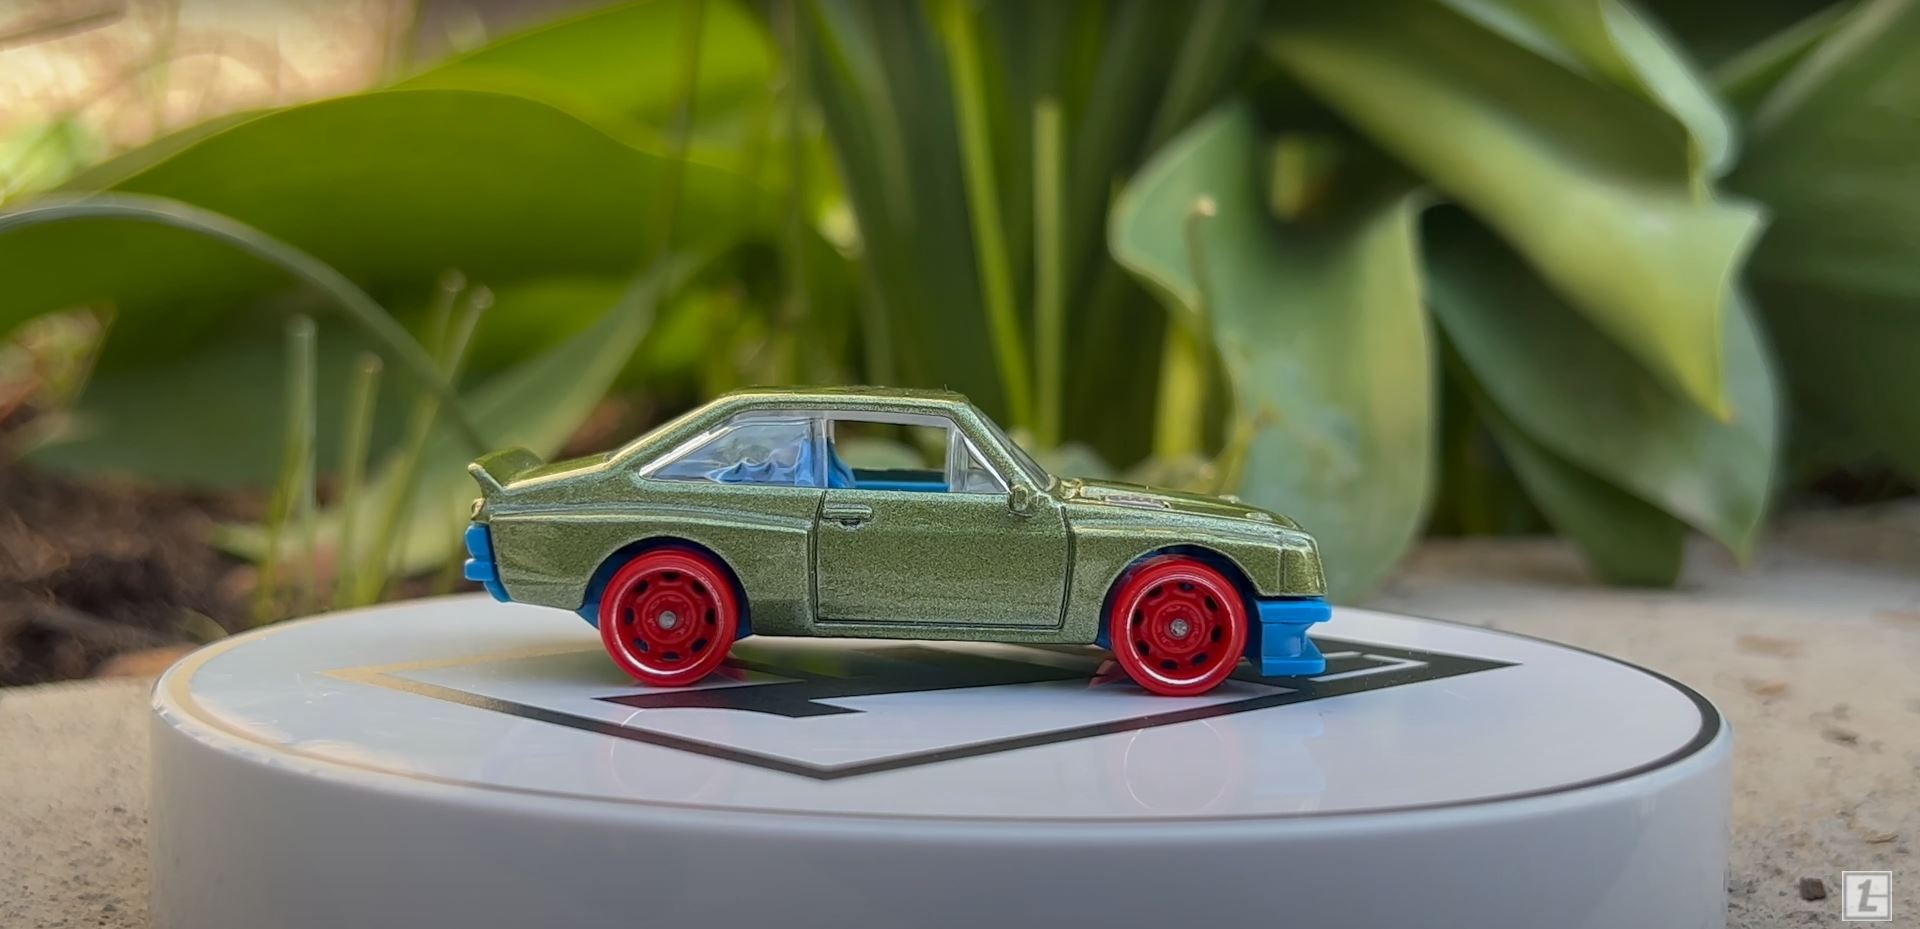 Mattel Reveals Seven New Hot Wheels Vehicles, You Can Get Them in 2022